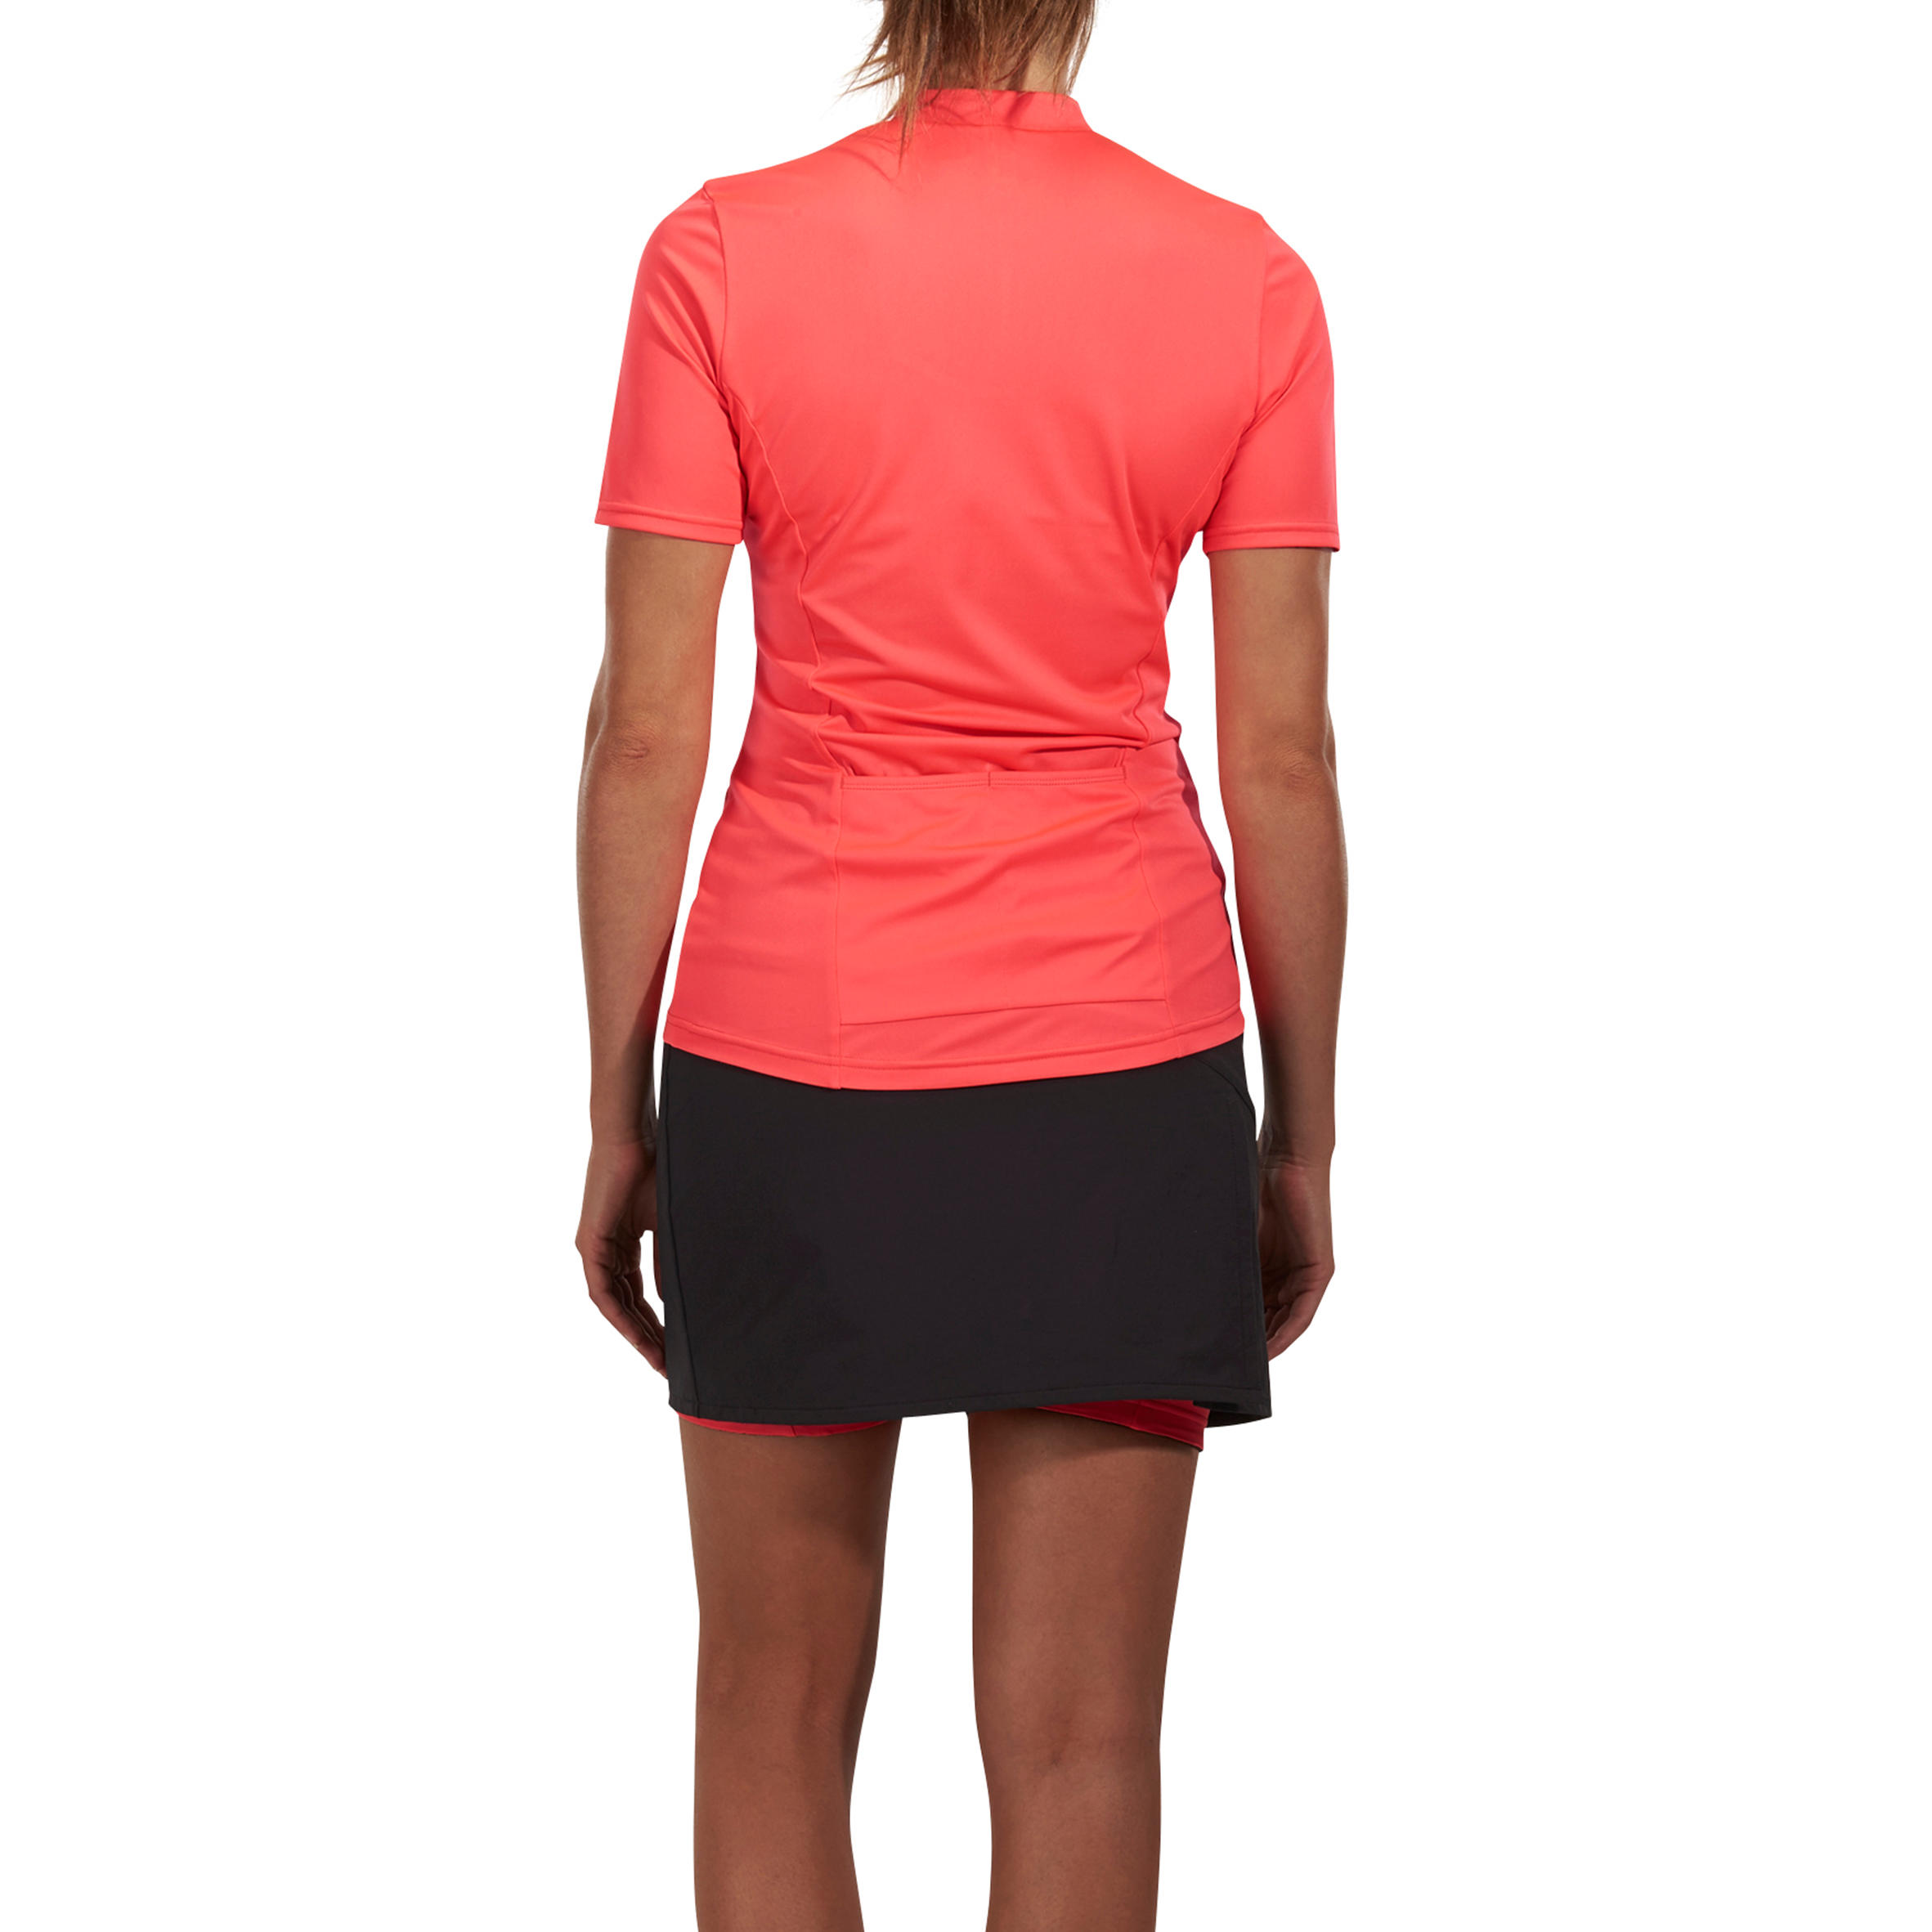 100 Women's Short-Sleeved Cycling Jersey - Pink 9/20